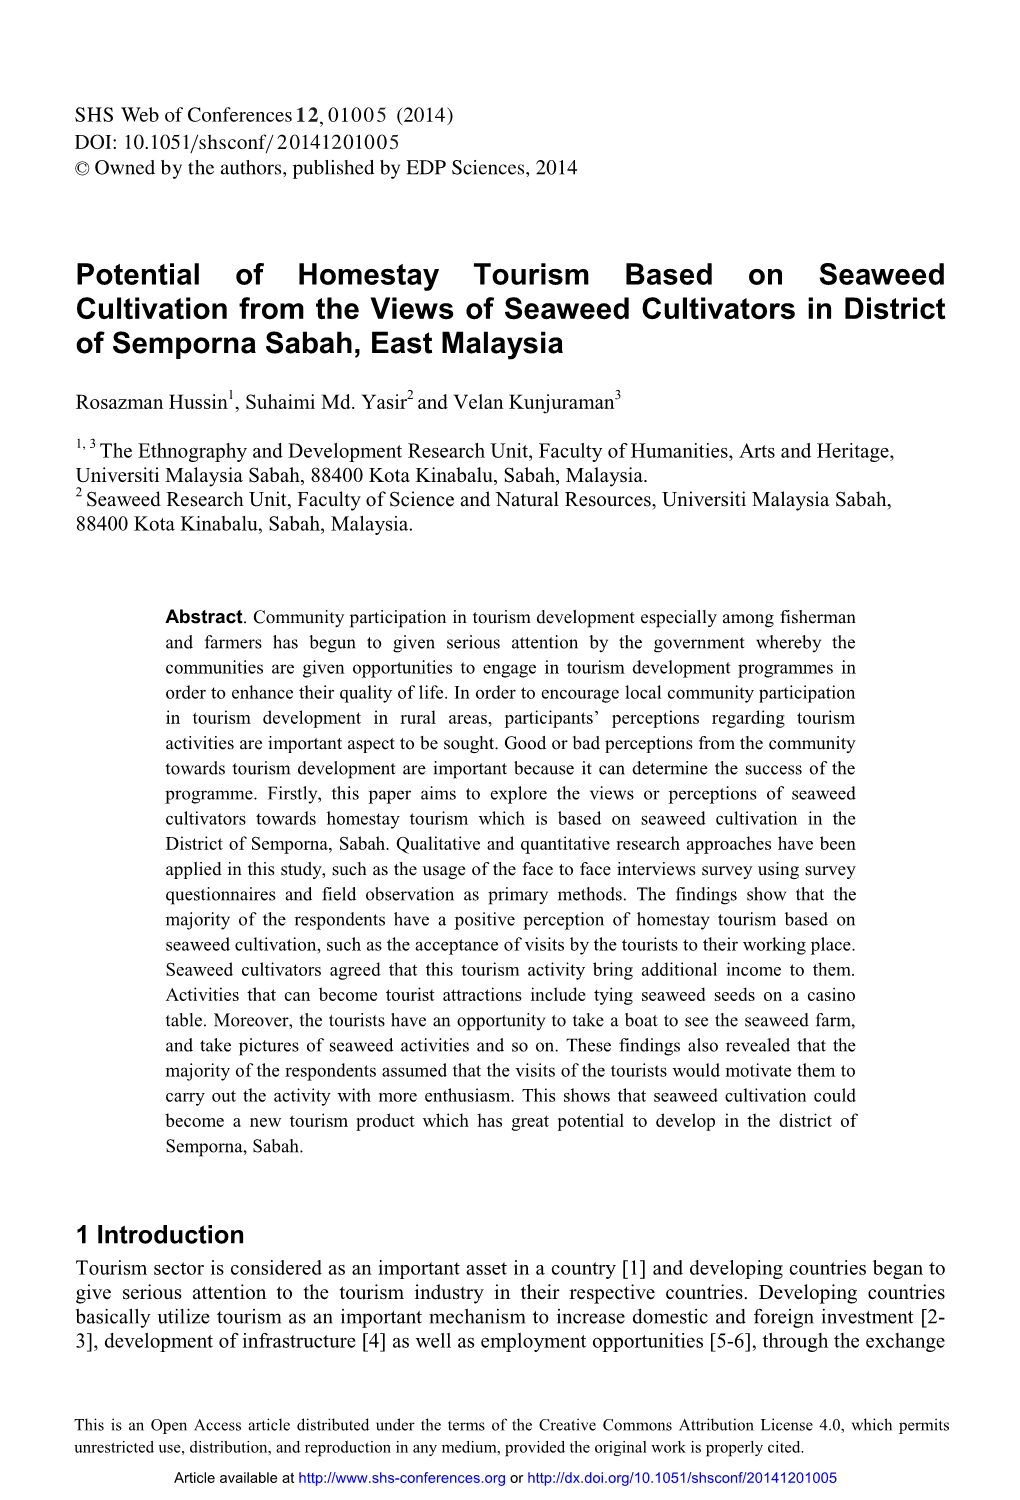 Potential of Homestay Tourism Based on Seaweed Cultivation from the Views of Seaweed Cultivators in District of Semporna Sabah, East Malaysia